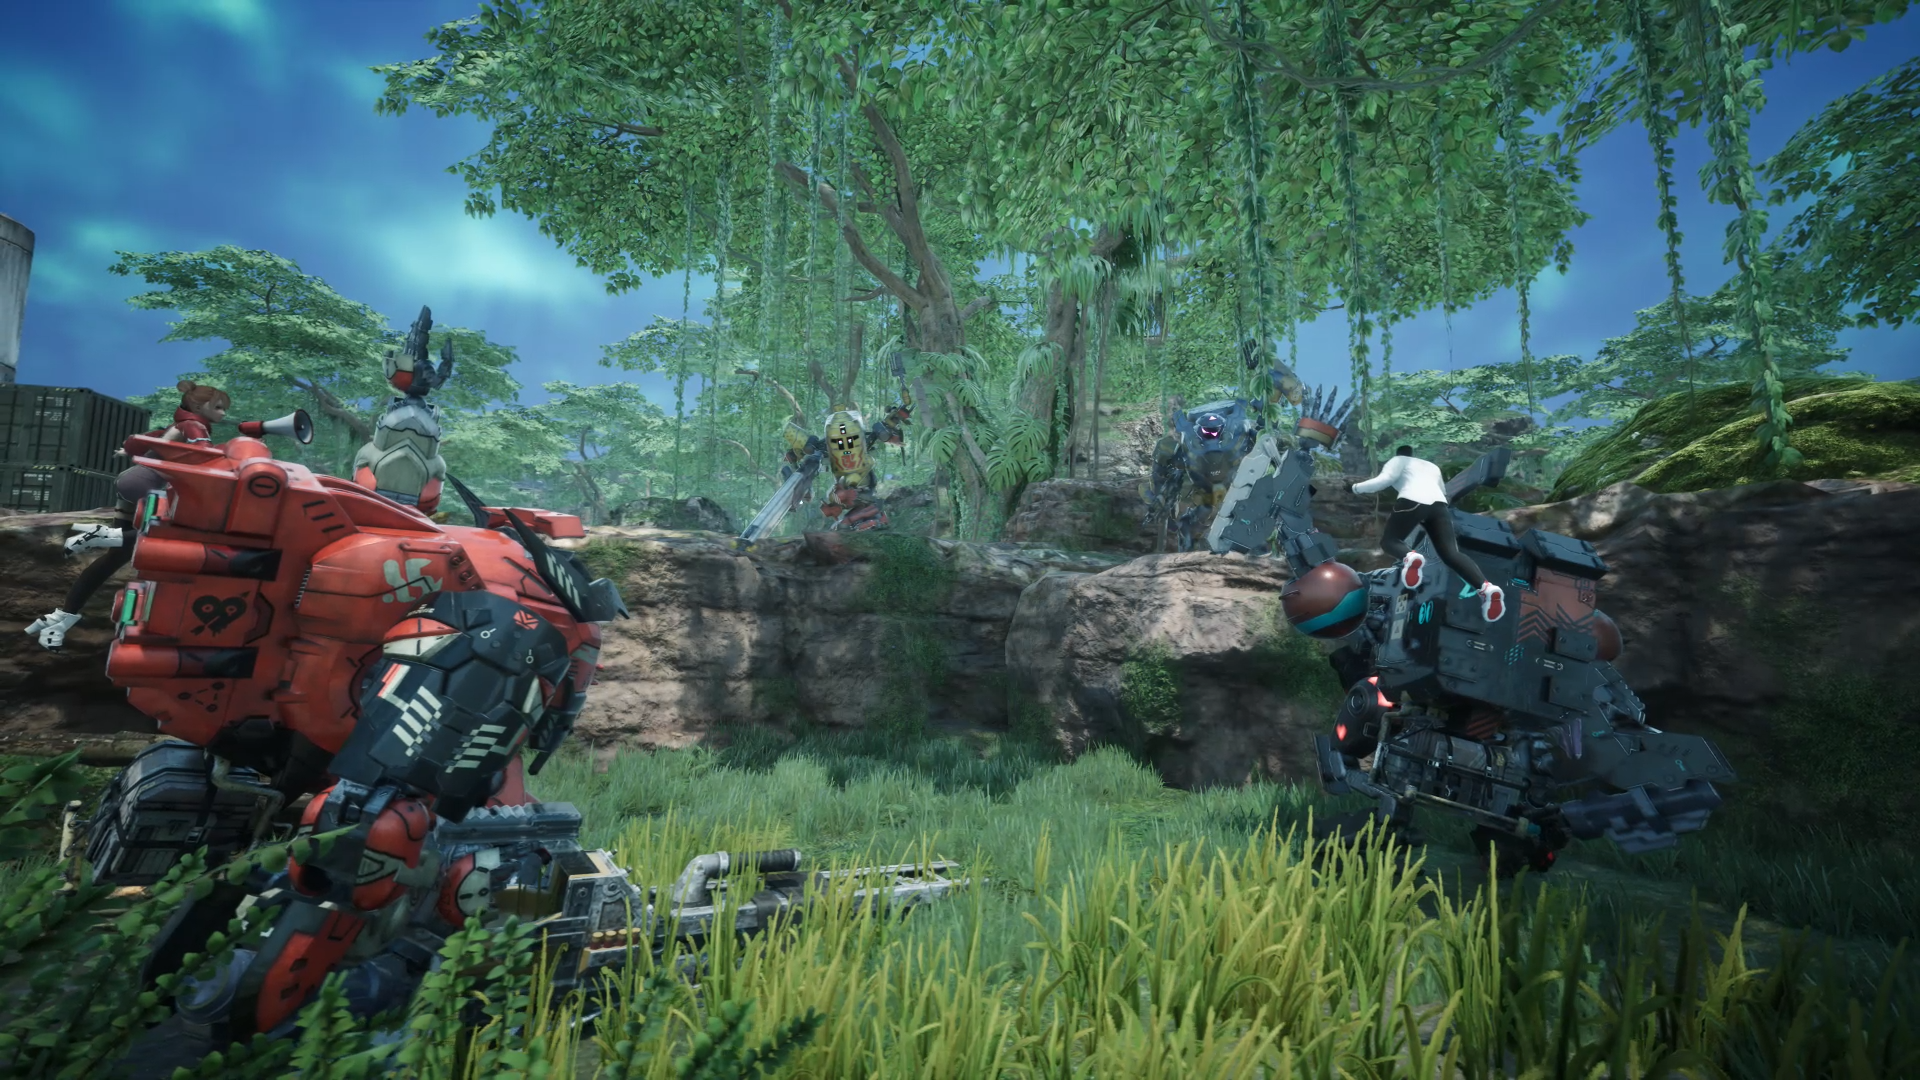 Multiple bipedal mechs battle in a grassy area in Synduality